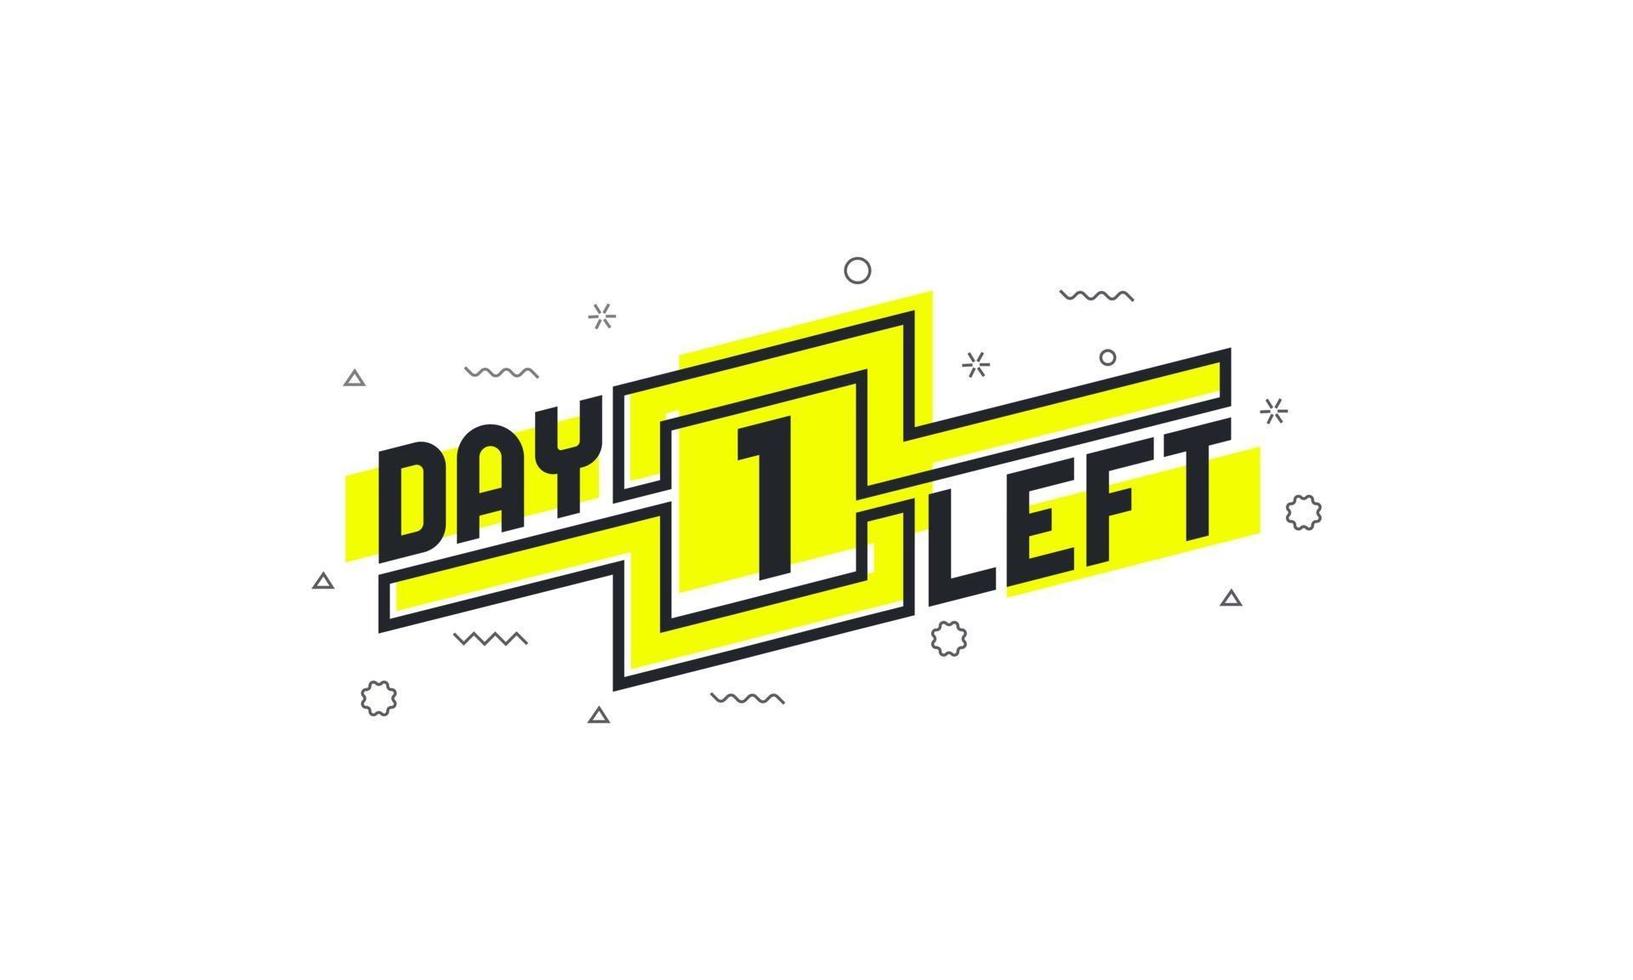 1 day left countdown sign for sale or promotion. vector